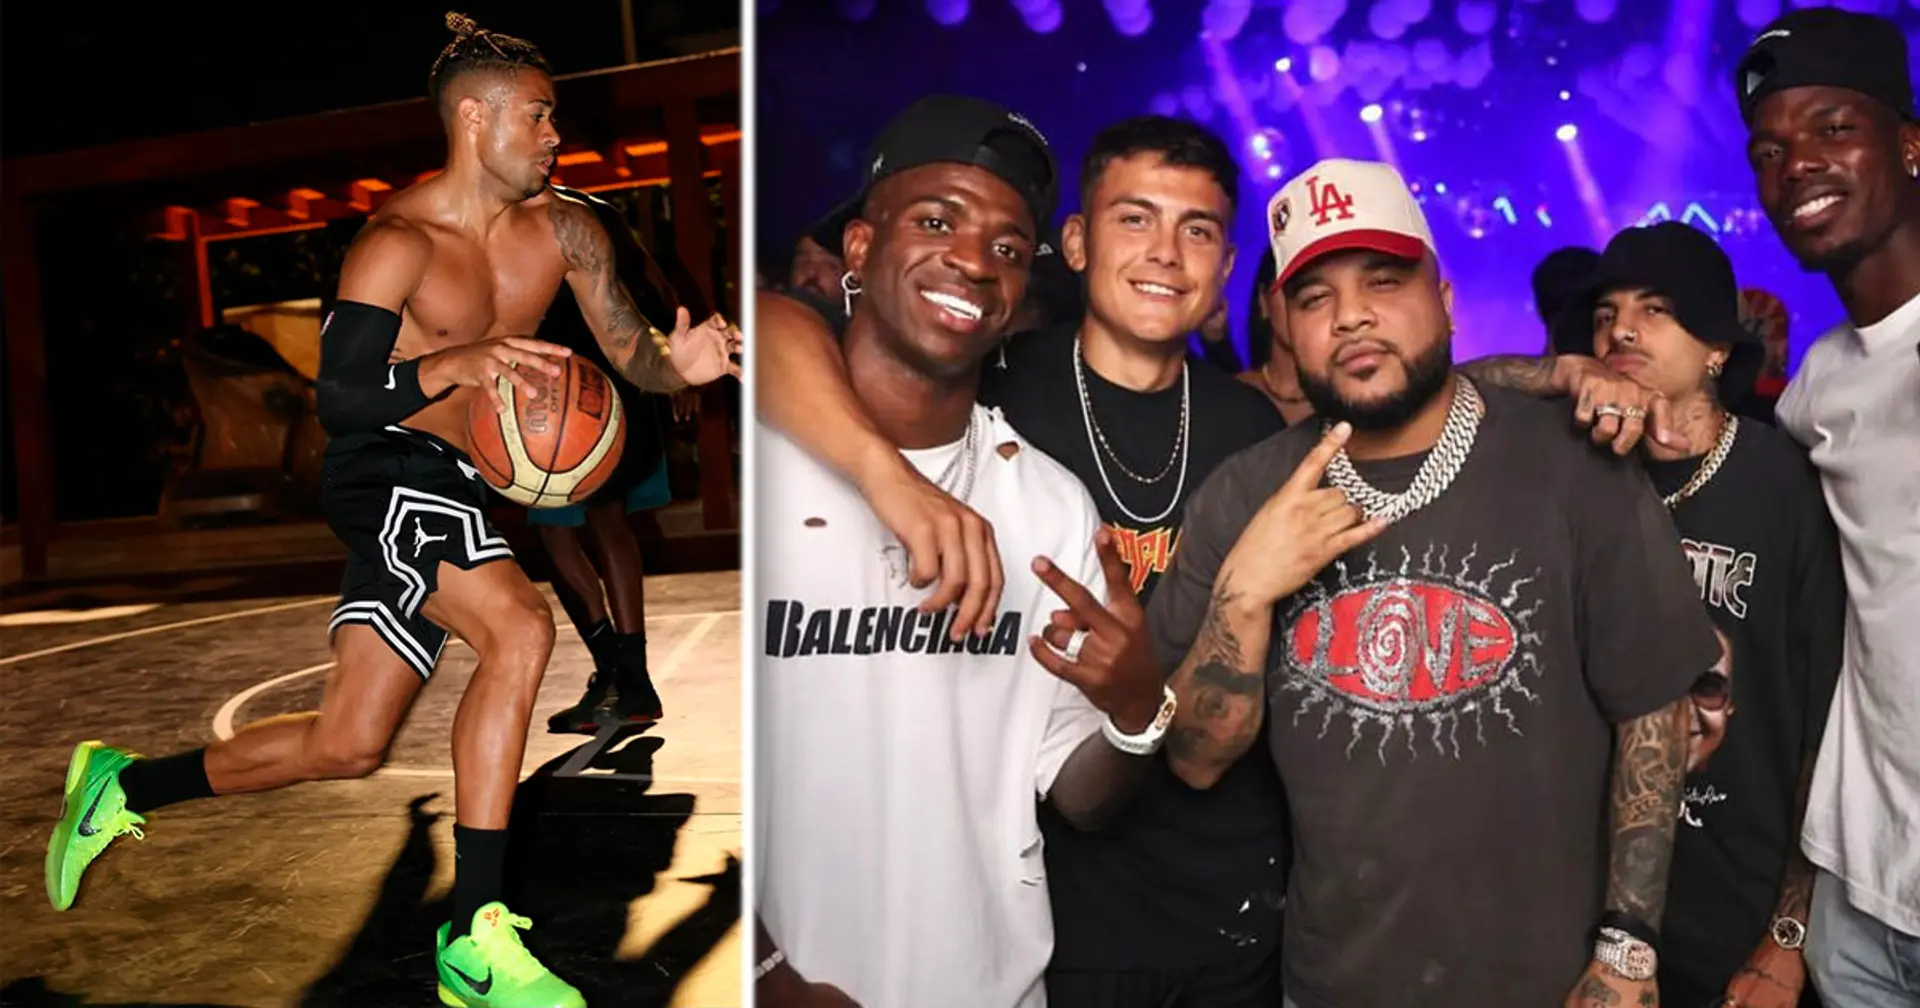 Vinicius meets Pogba and 10 more best pics of Real Madrid players on holiday